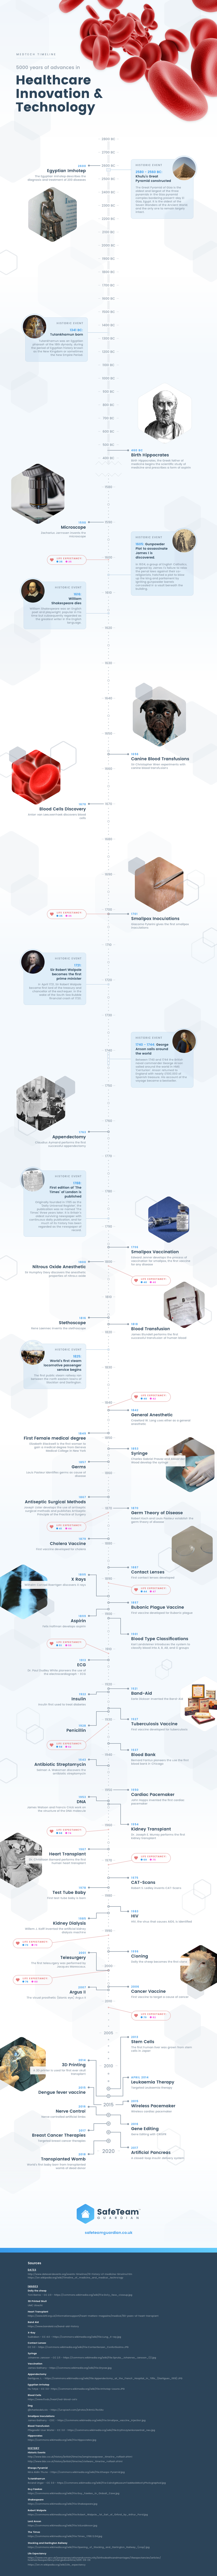 Medtech Timeline - 5000 years of advances in Healthcare Innovation & Technology